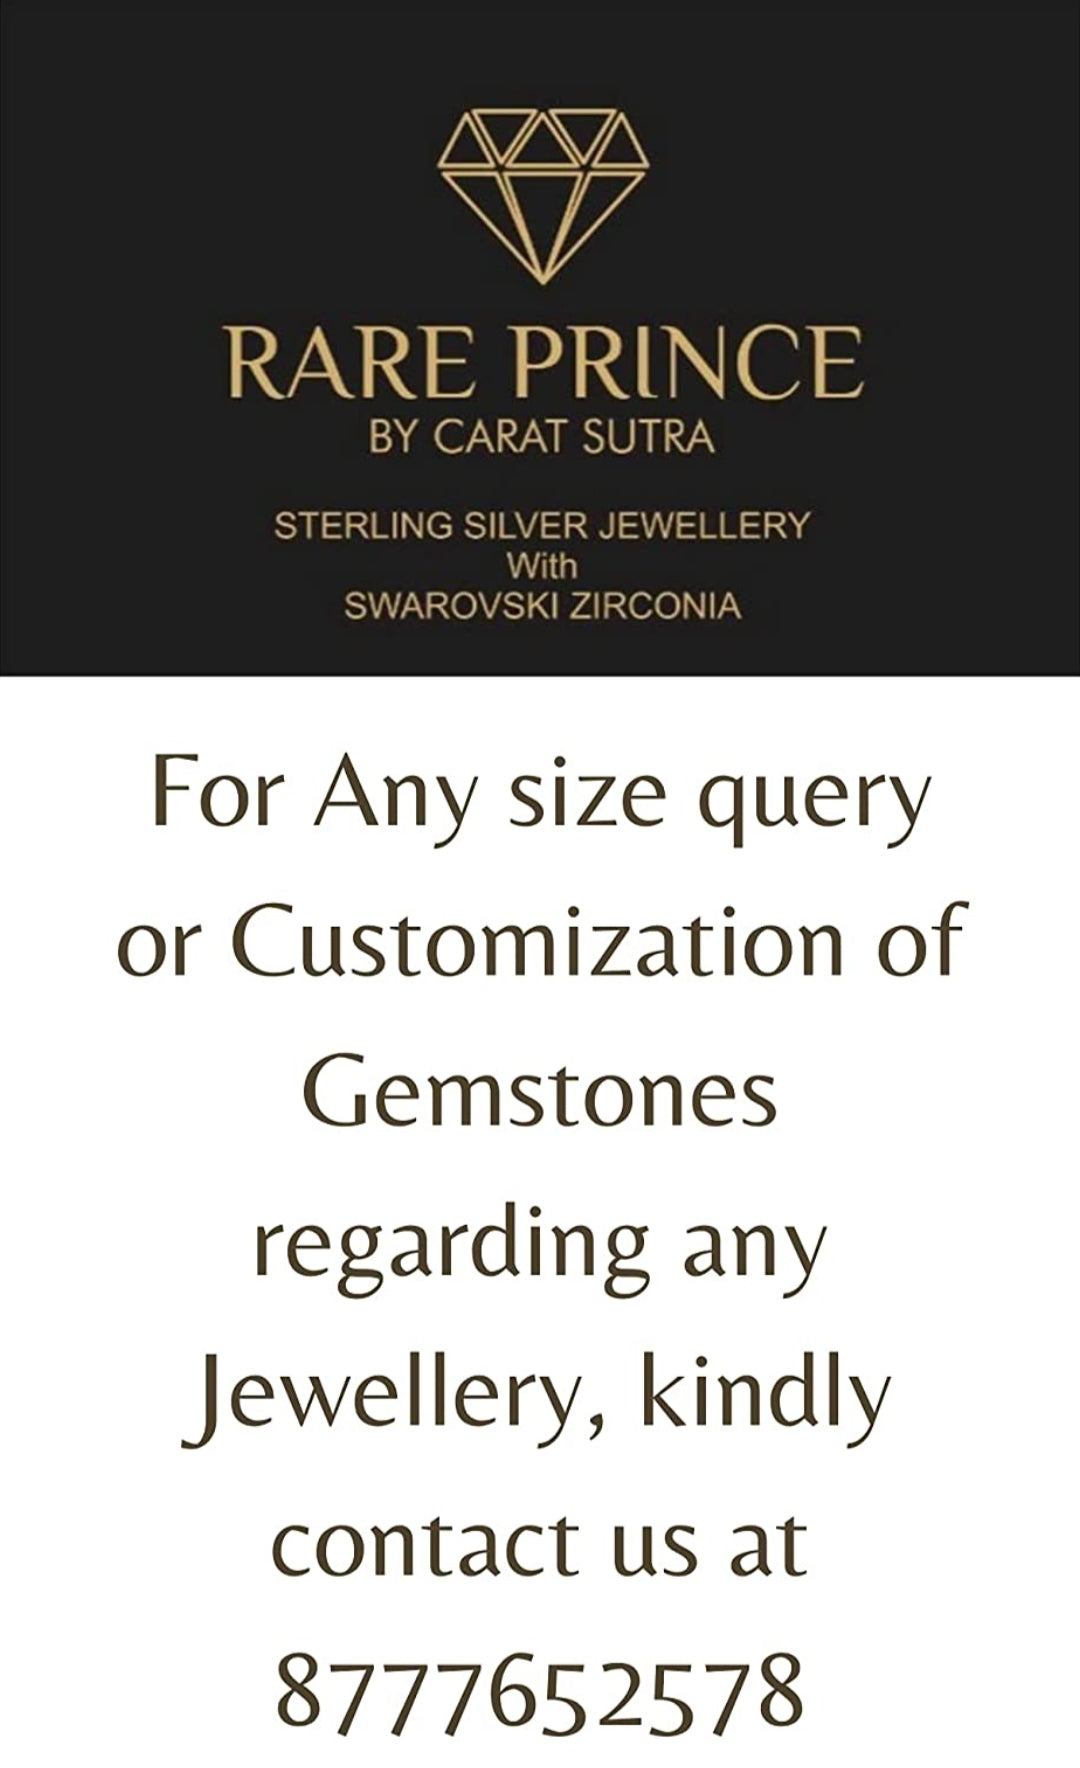 RARE PRINCE by CARAT SUTRA | Solid 10mm Miami Cuban Link Chain with Iced Lock | 22kt Gold Micron Plated on 925 Sterling Silver Chain with AAA+ Quality Swarovski Diamonds | Men's Jewelry | With Certificate of Authenticity and 925 Hallmark - caratsutra